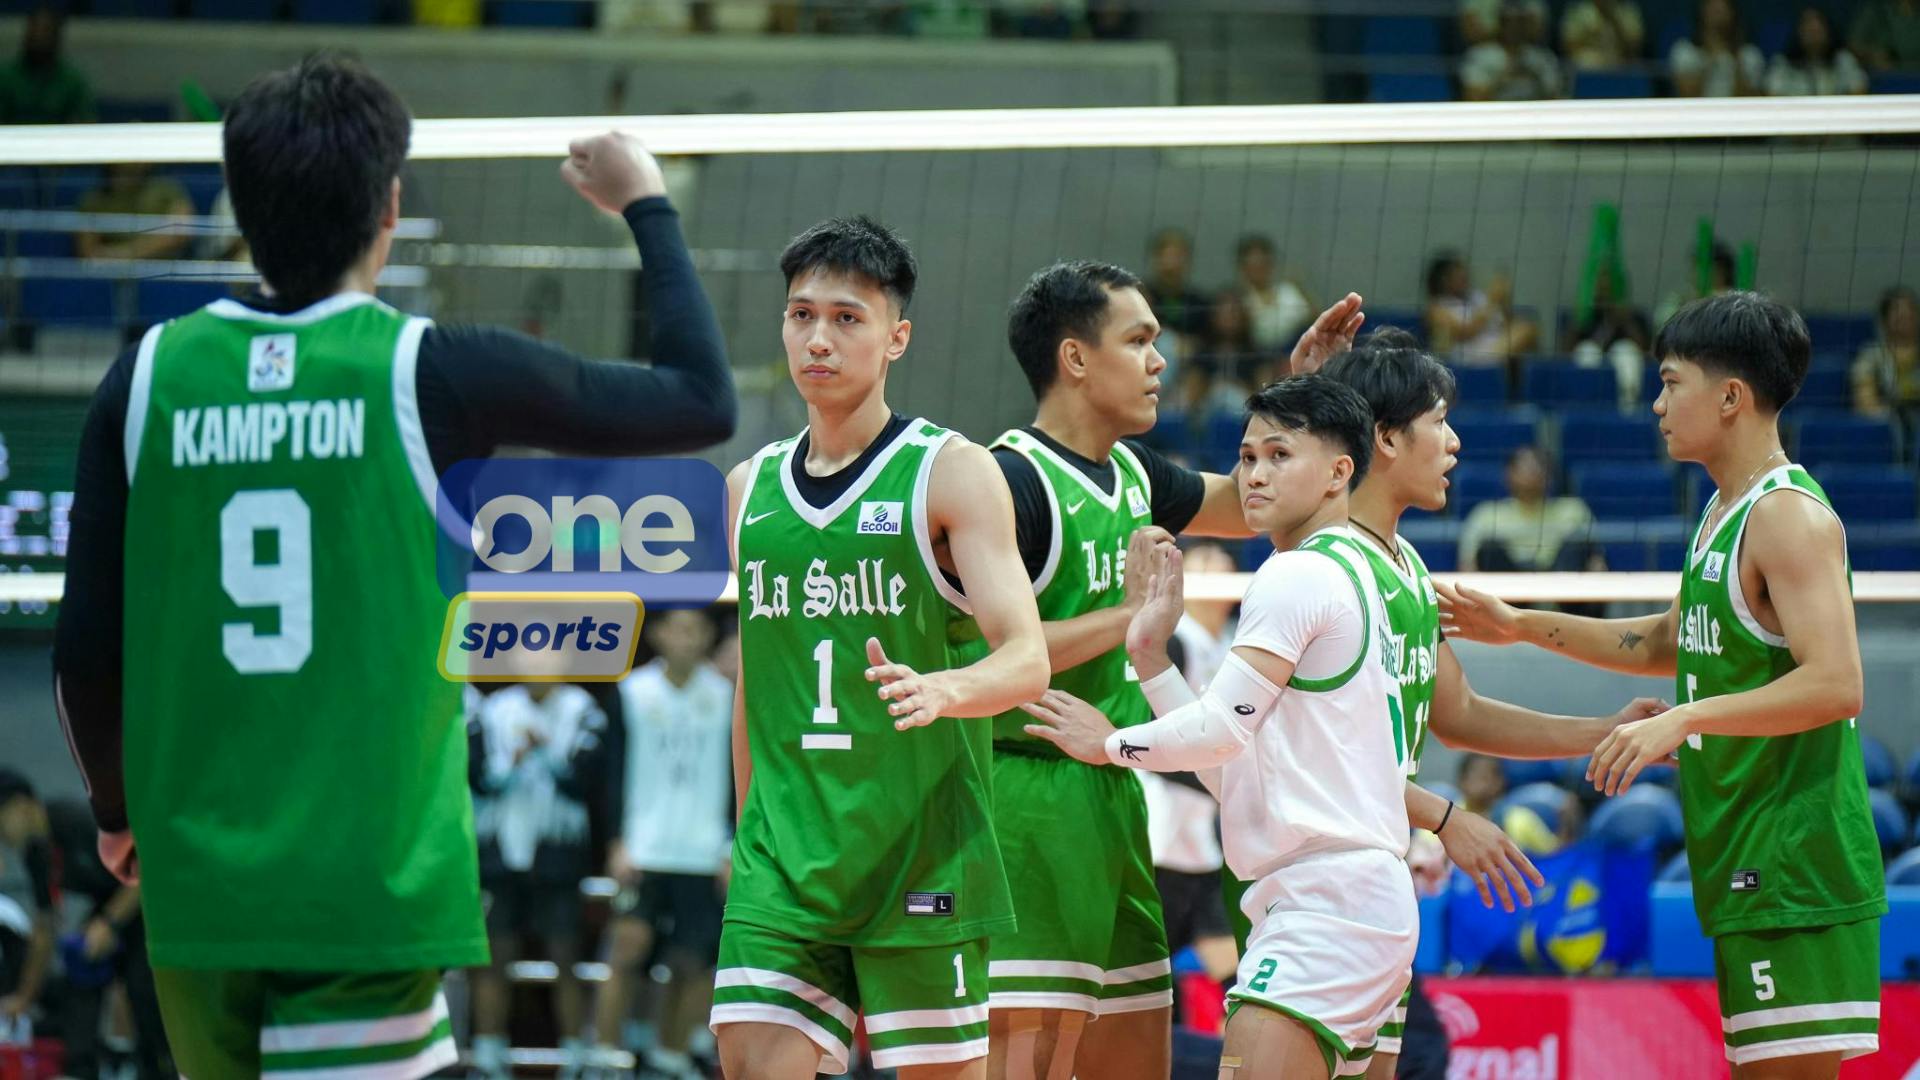 UAAP: DLSU tames UST, setting up virtual best-of-3 vs. defending champion NU in Final Four